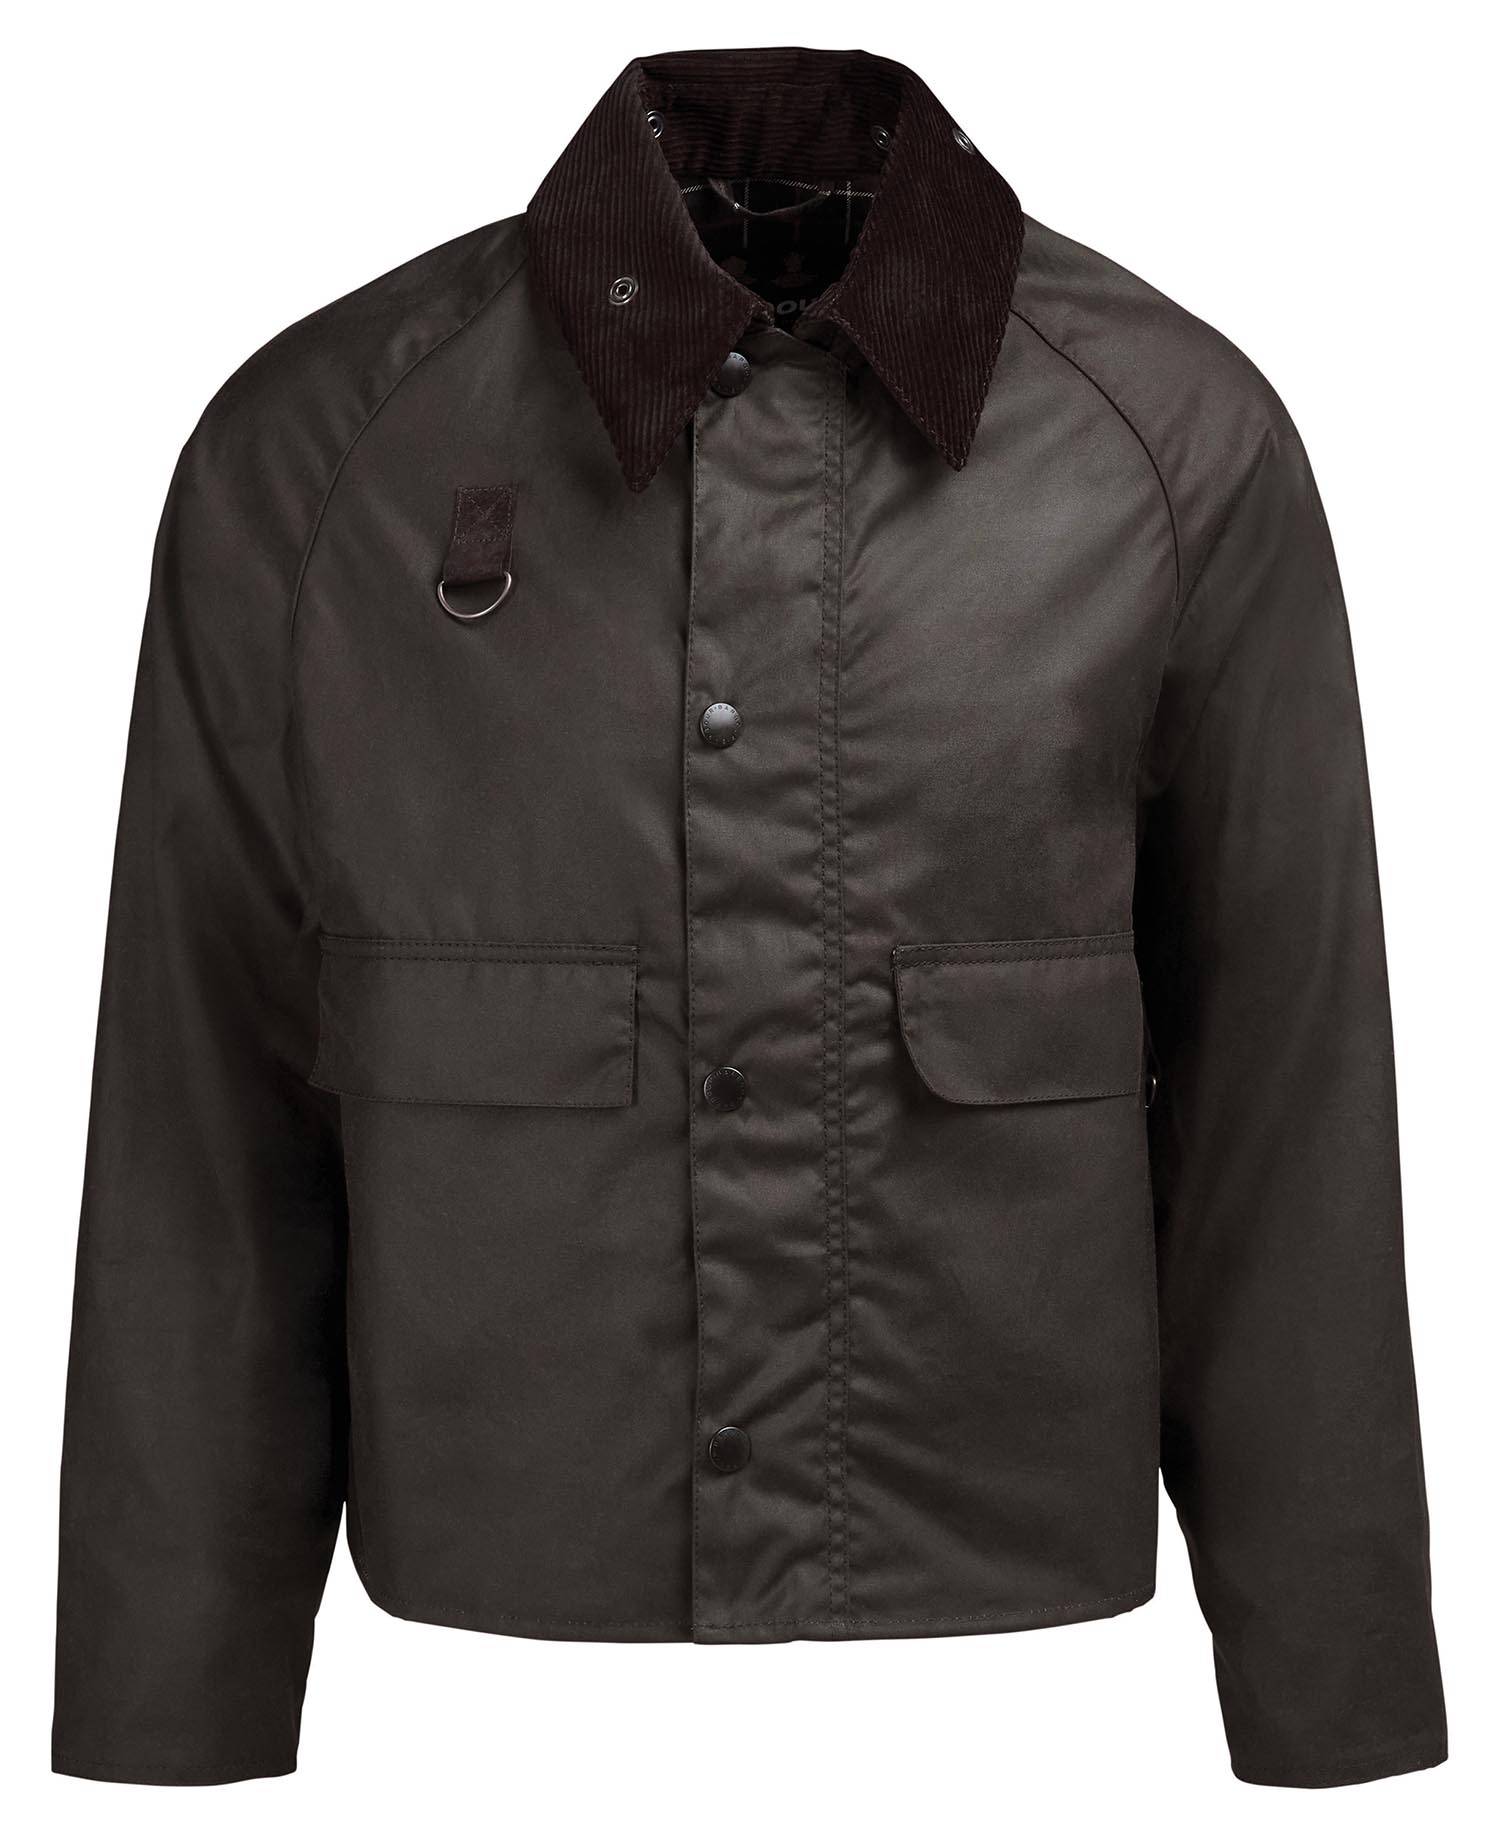 Shop the Barbour SL Spey Wax Jacket in Green today. | Barbour